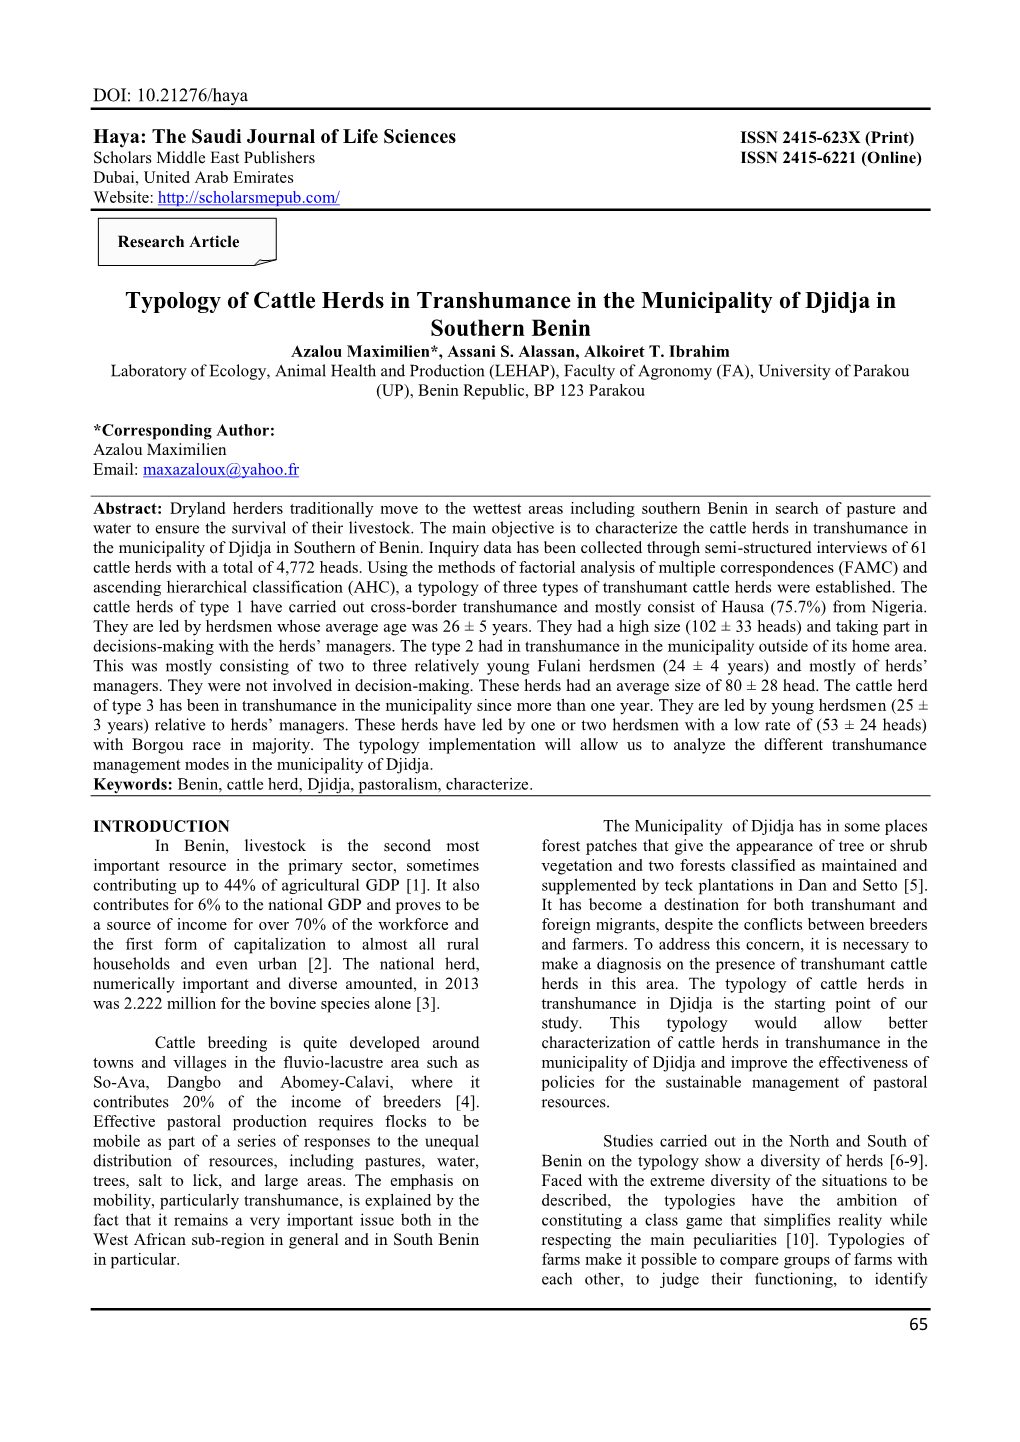 Typology of Cattle Herds in Transhumance in the Municipality of Djidja in Southern Benin Azalou Maximilien*, Assani S